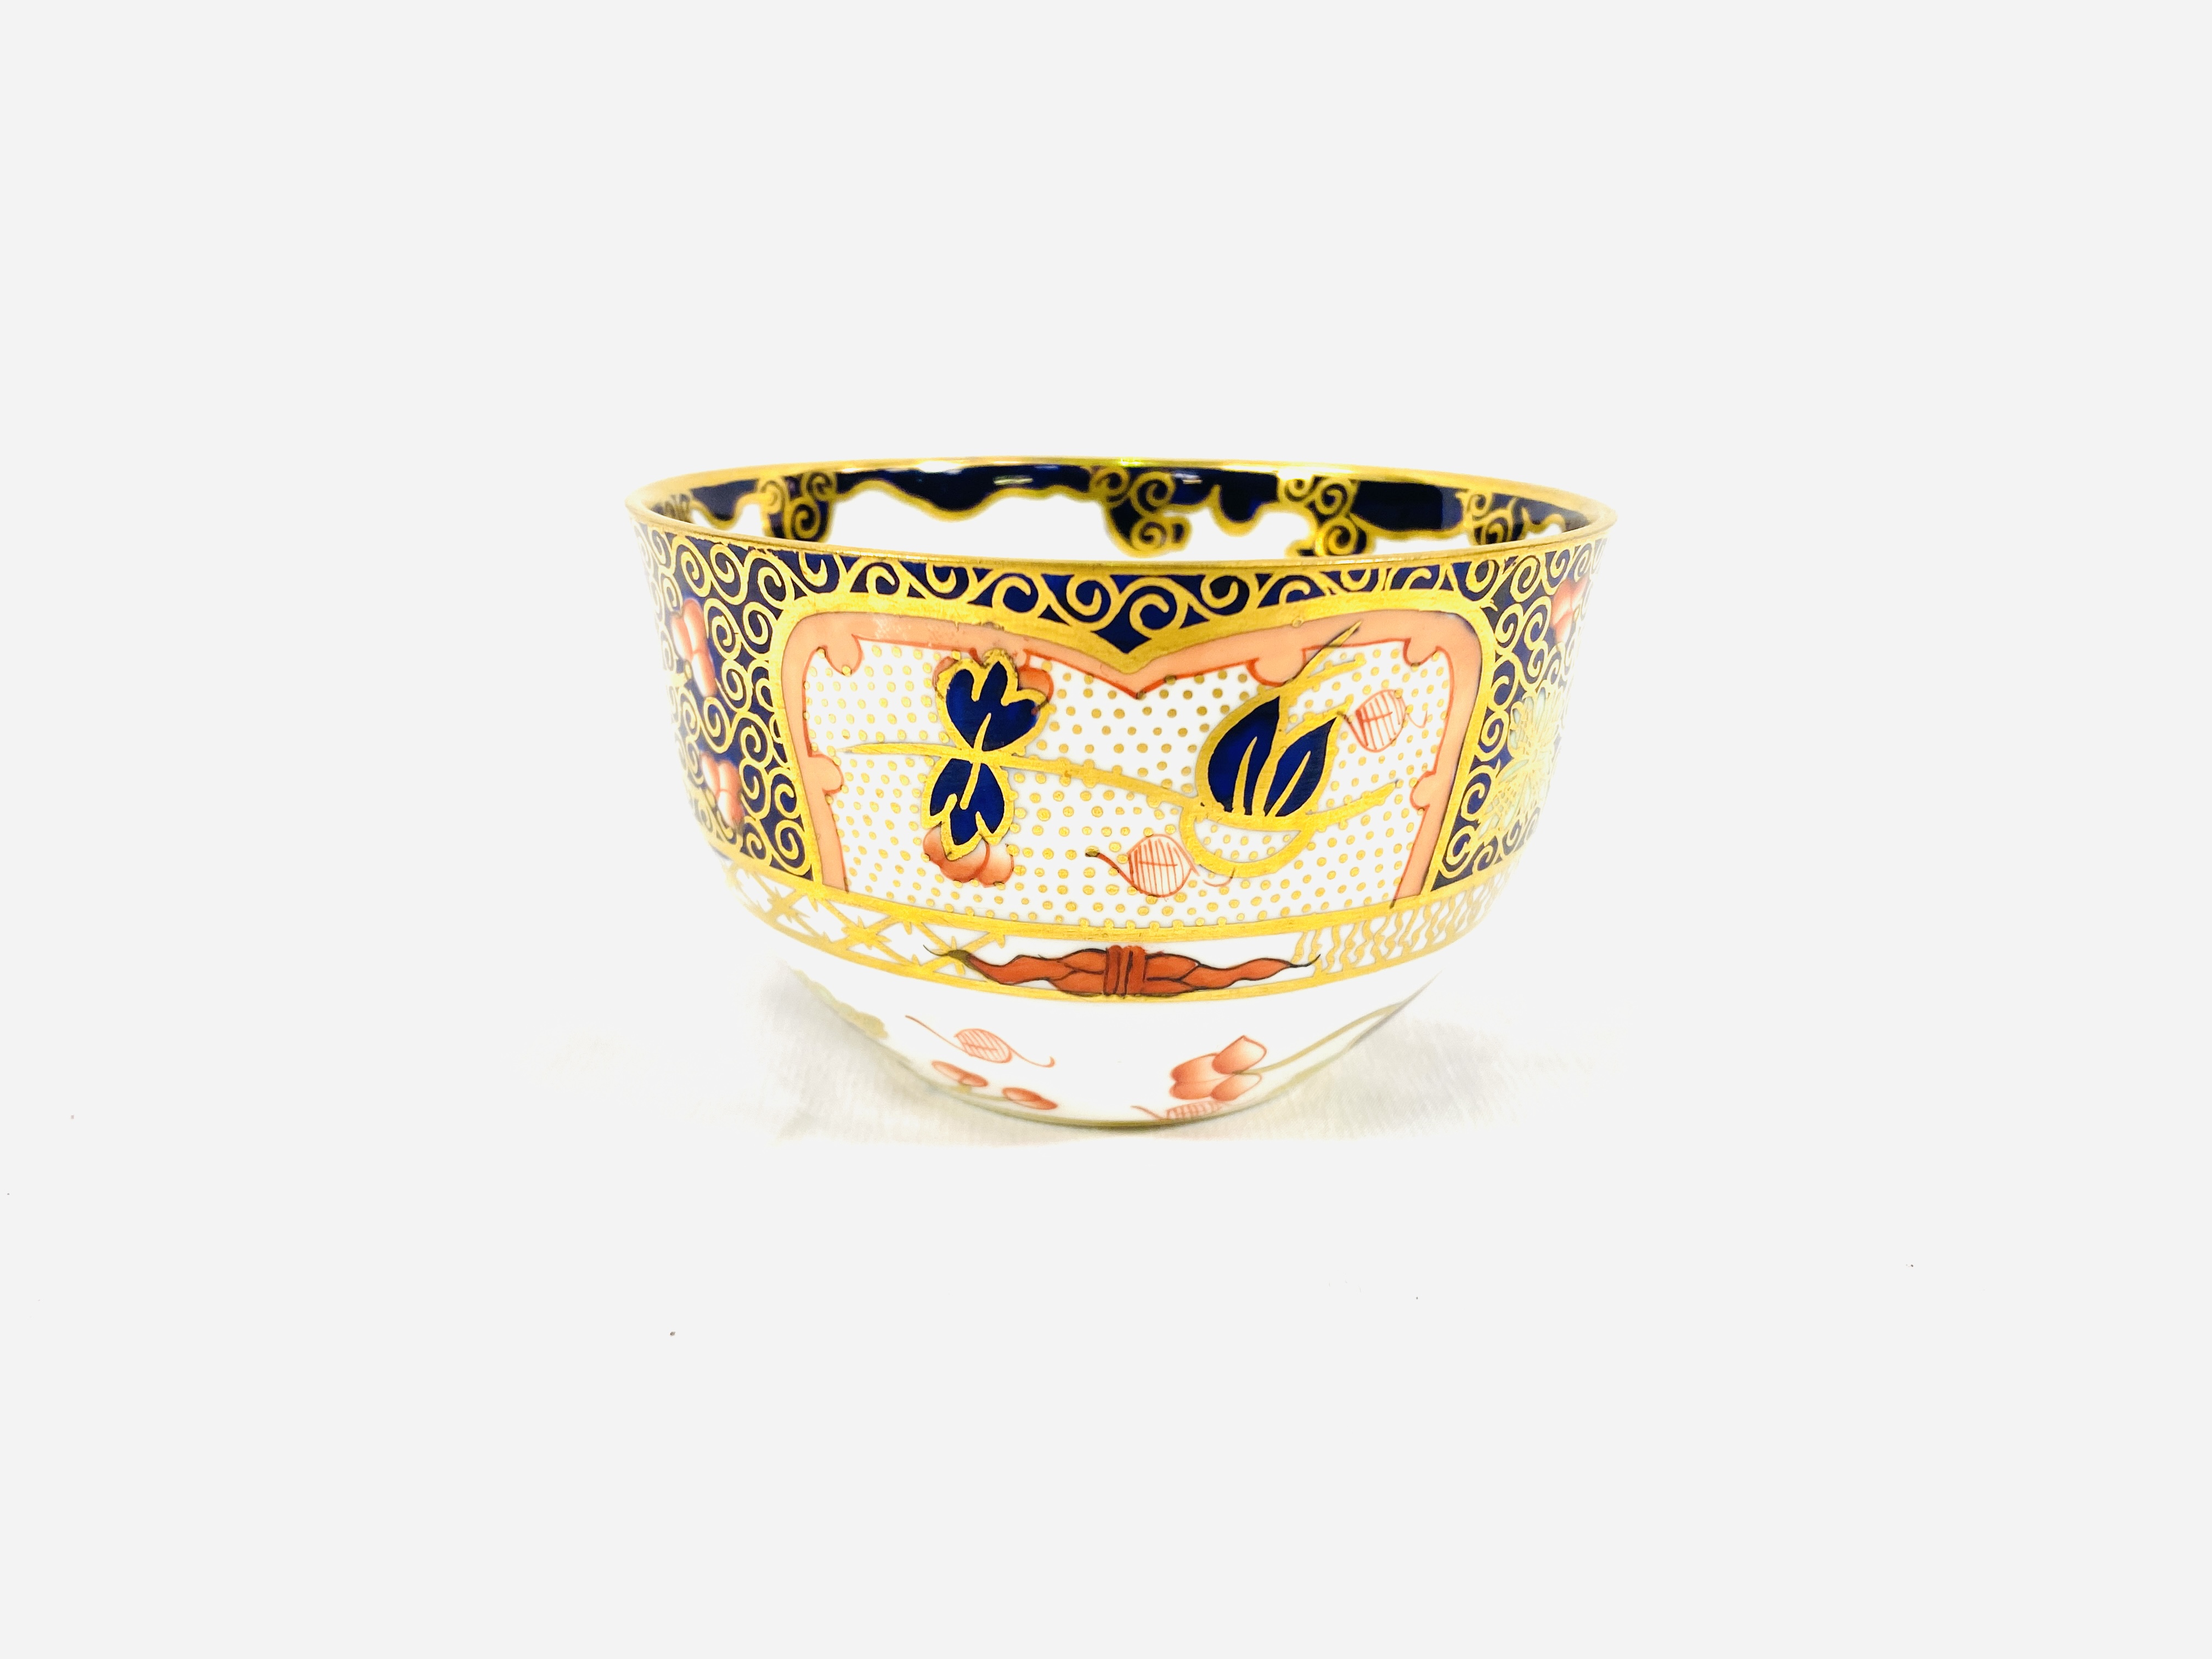 Items of Royal Crown Derby - Image 3 of 9